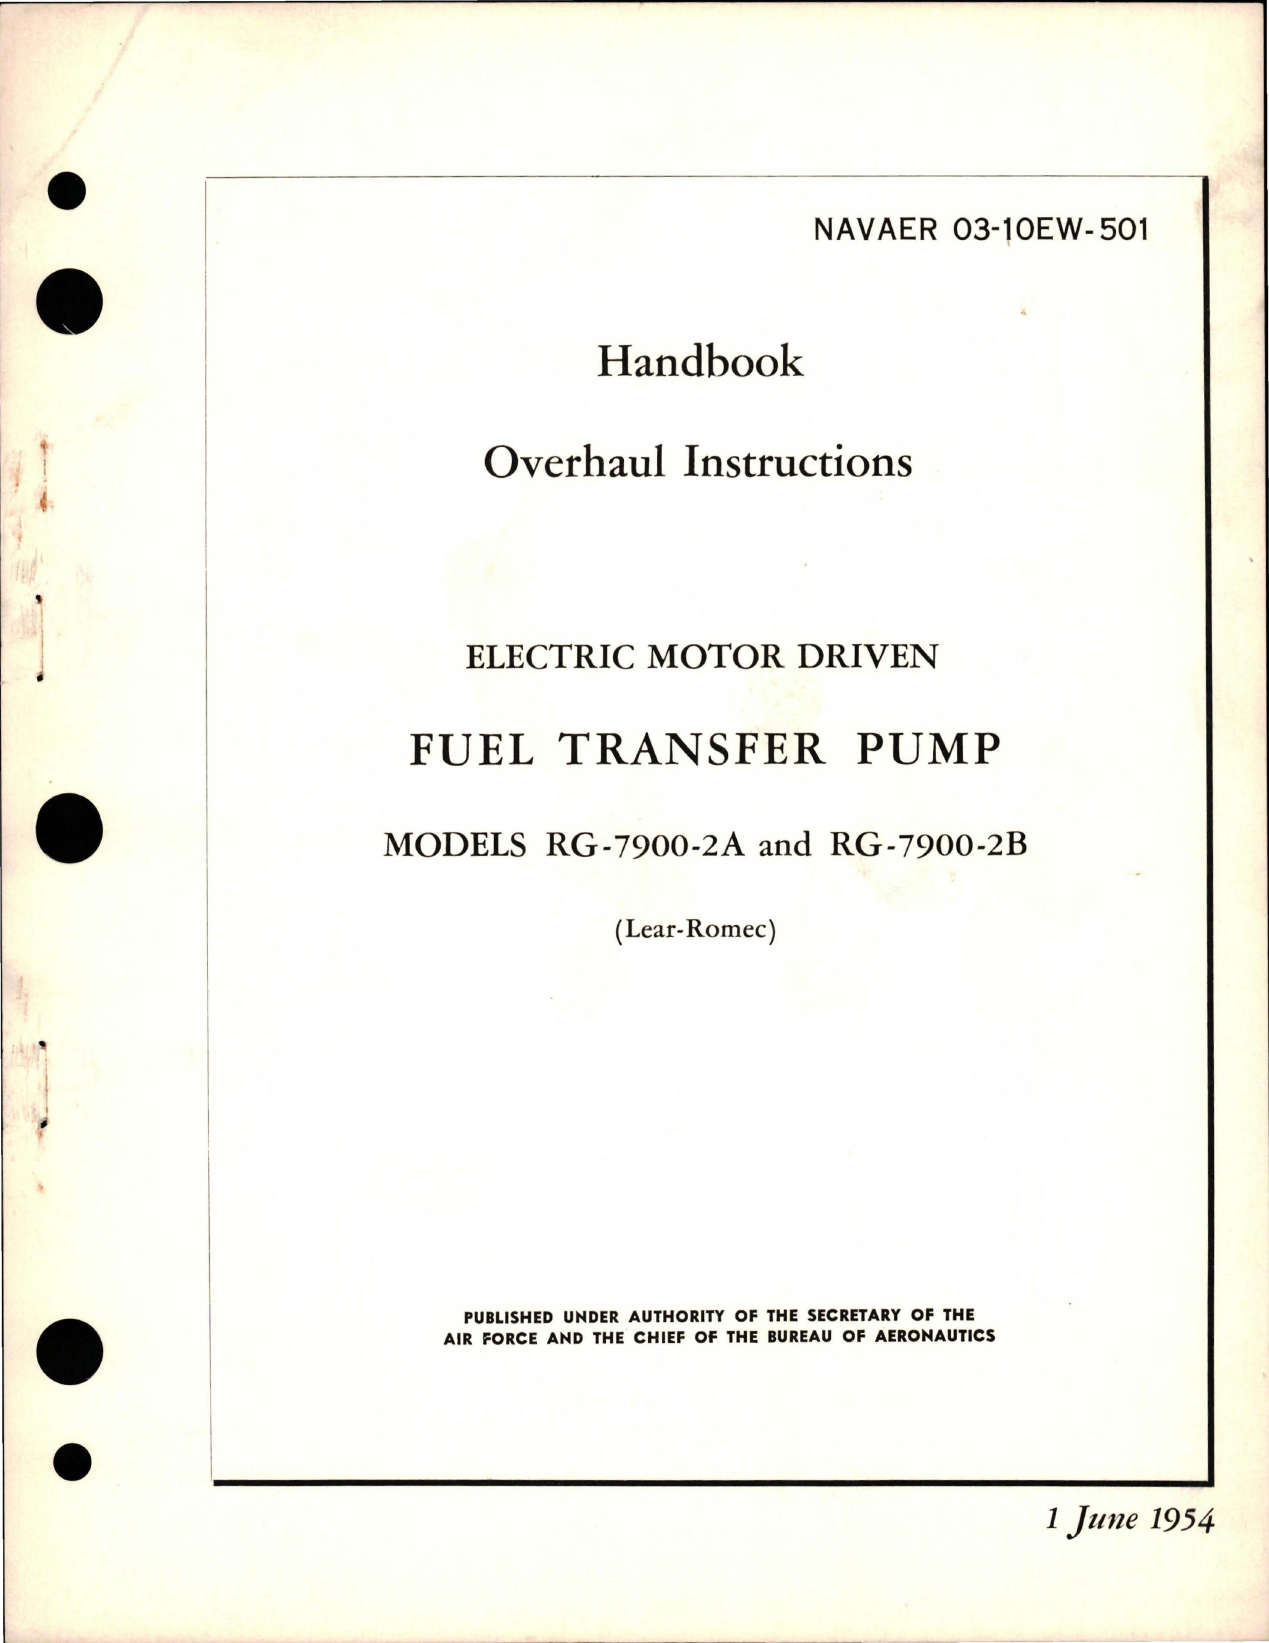 Sample page 1 from AirCorps Library document: Overhaul Instructions for Electric Motor Driven Fuel Transfer Pump - Models RG-7900-2A, RG-7900-2B 